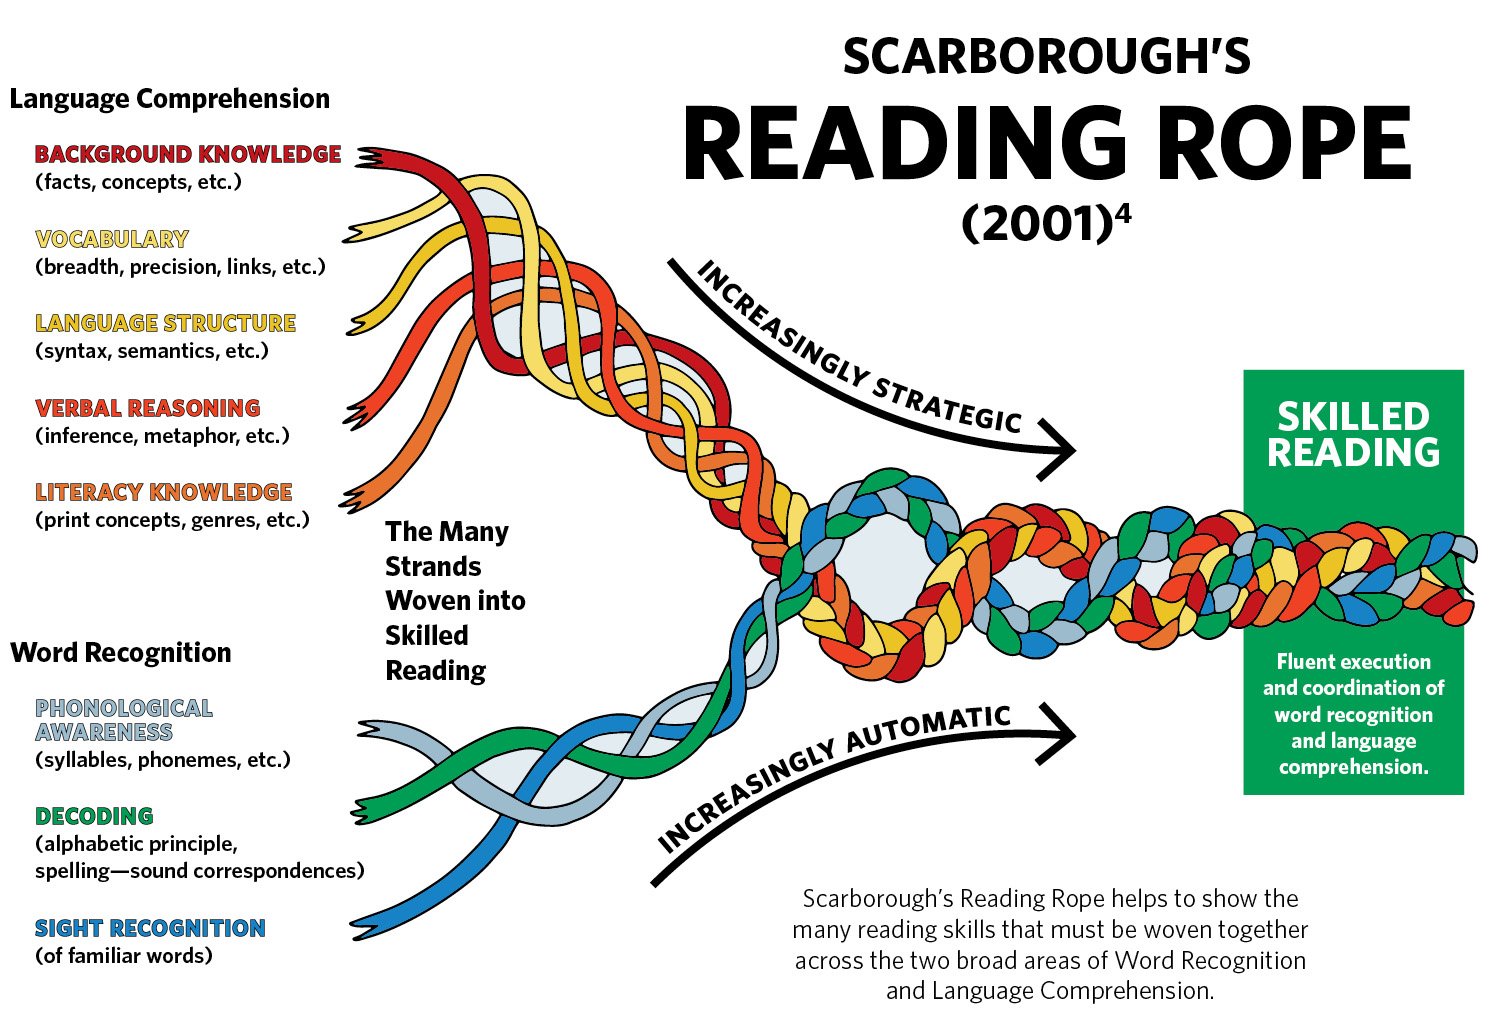 Illustration showing how the different strands of Language Comprehension and Word Recognition are woven together